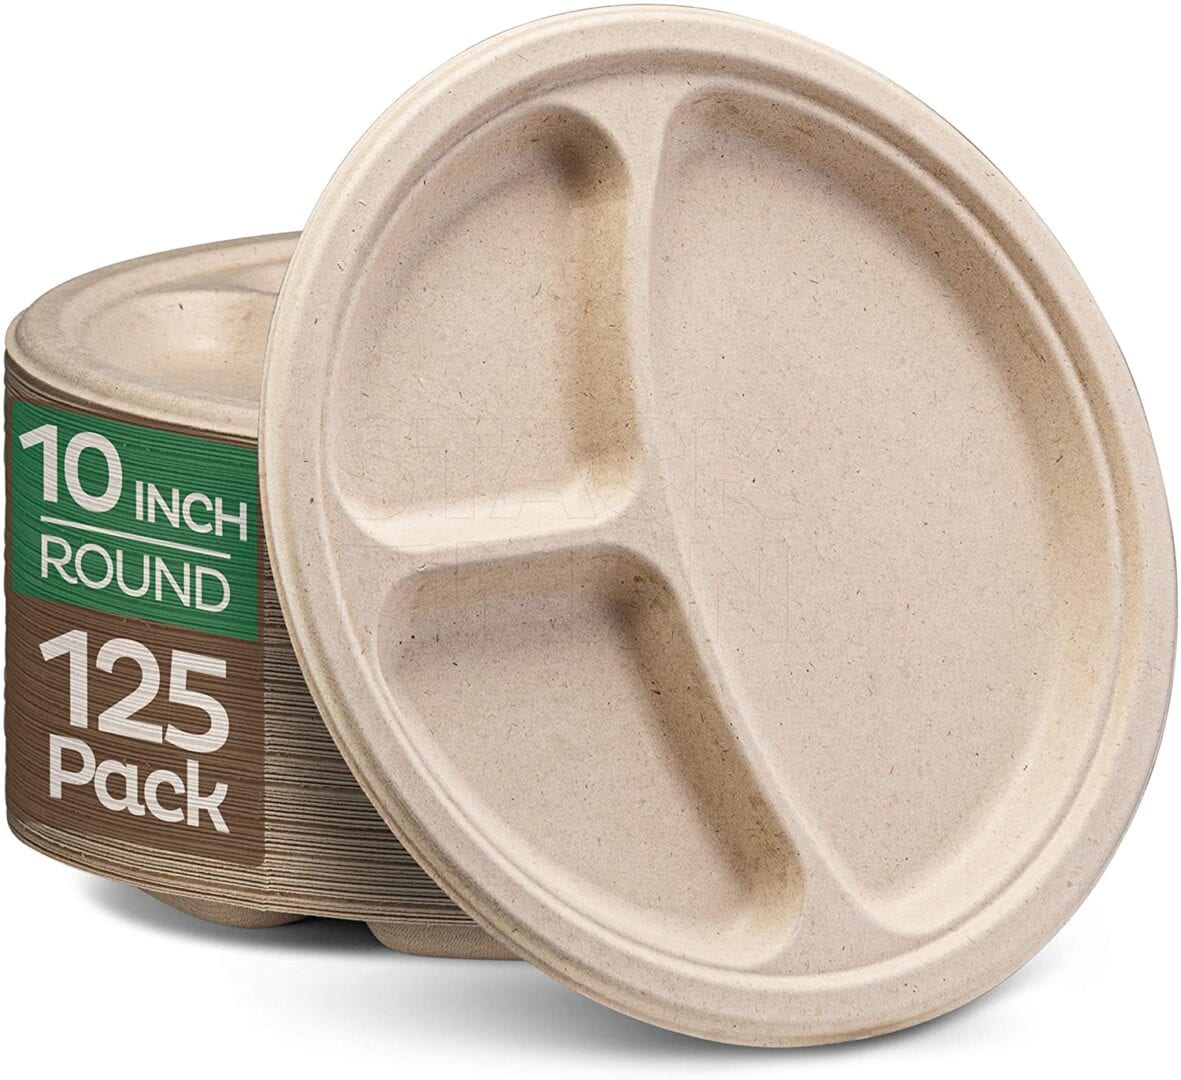 100% Compostable Clamshell Take Out Food Containers [8X8 3-Compartment  200-Pack] Heavy-Duty Quality to go Containers, Natural Disposable Bagasse